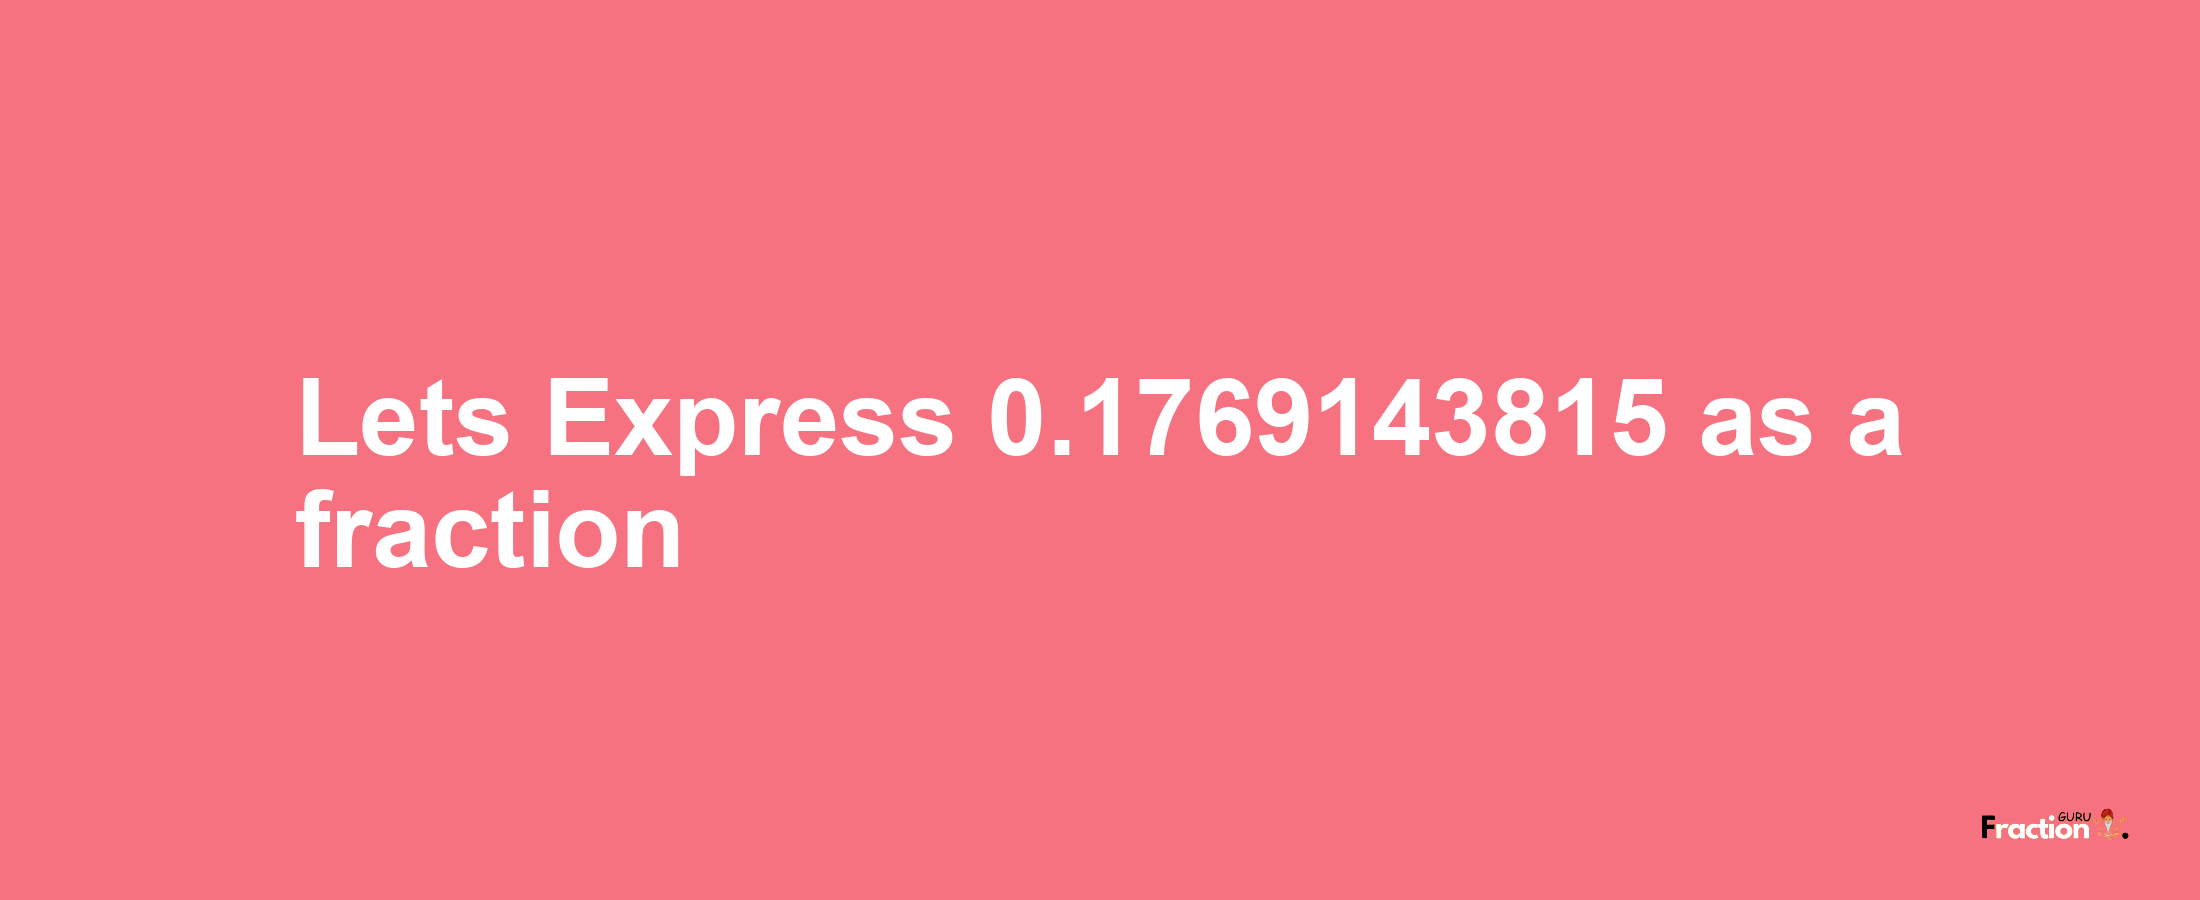 Lets Express 0.1769143815 as afraction